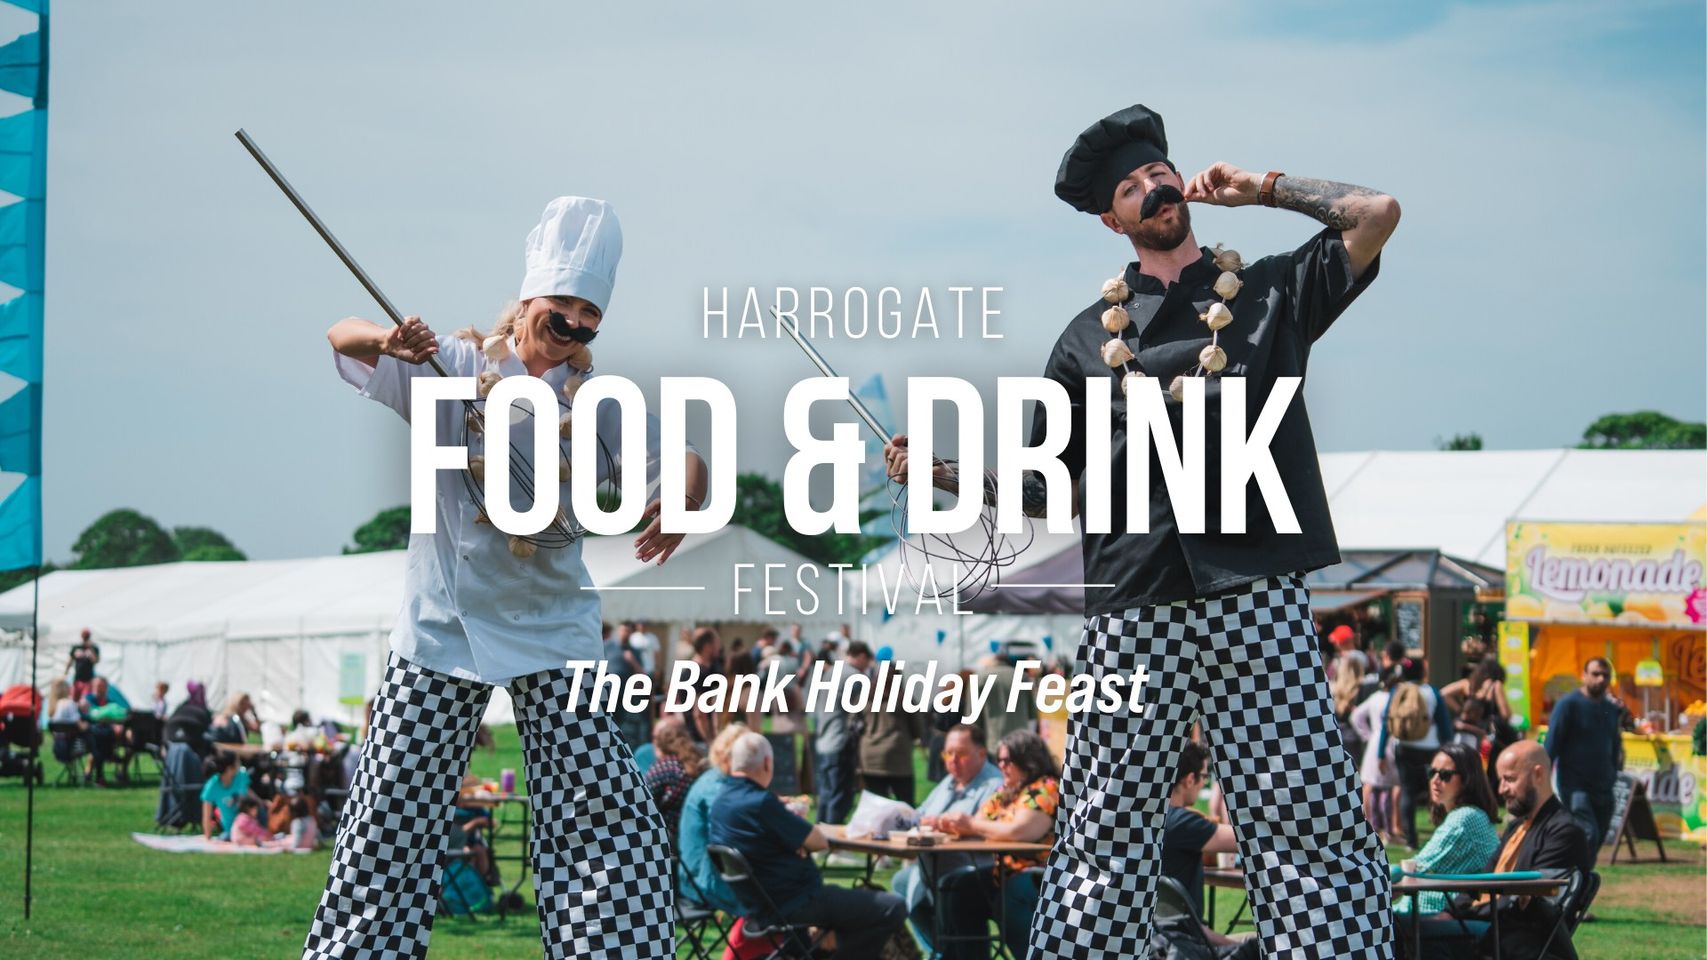 Image name FB Banner Riverside Food Festival the 15 image from the post Harrogate Food & Drink Festival 2024: A Bank Holiday Feast in Yorkshire.com.